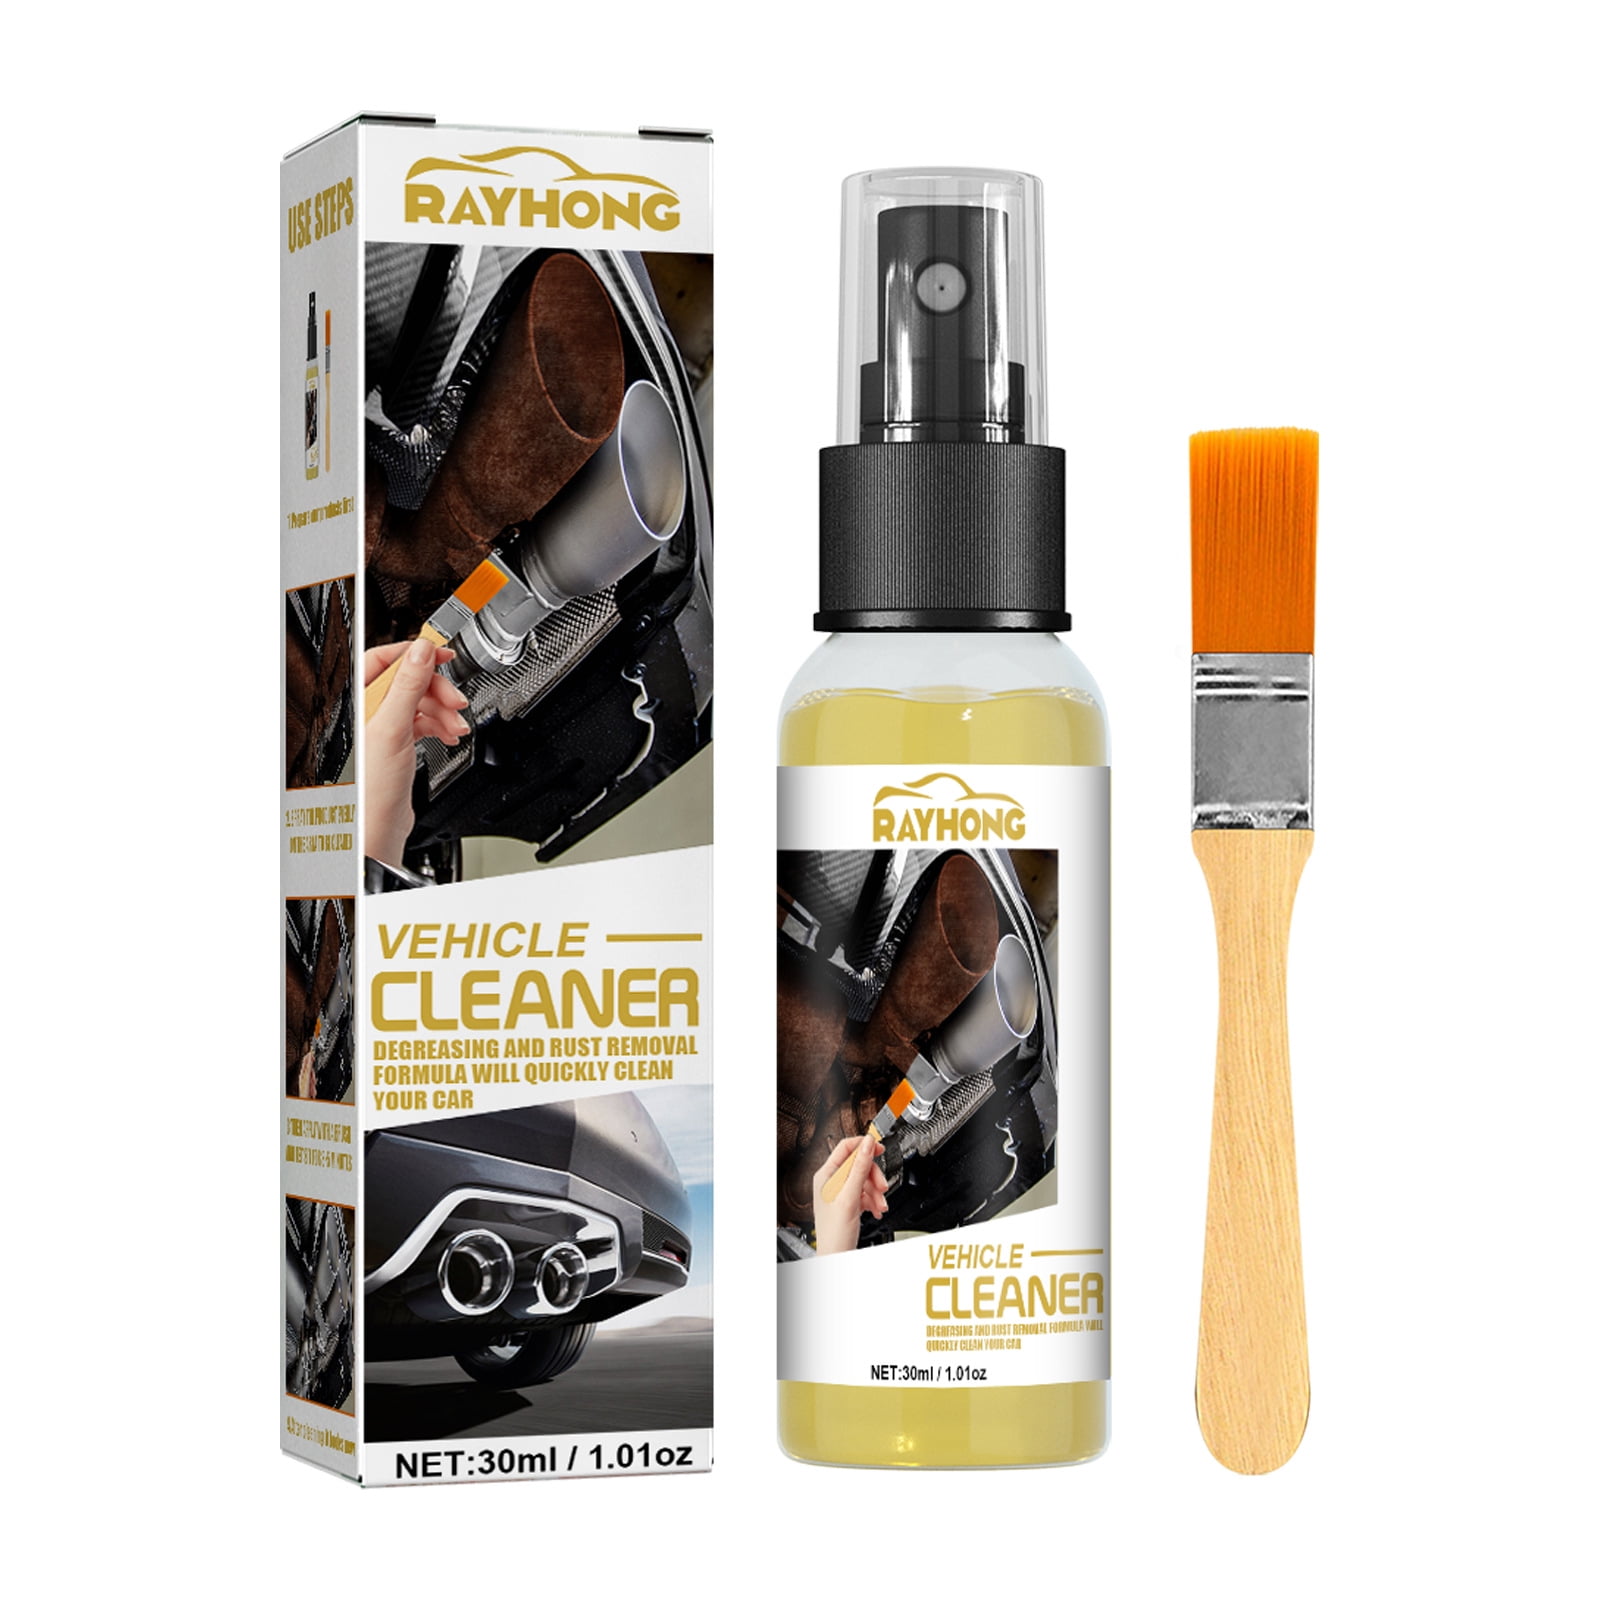 NUOKOU Rust Remover for Metal, Multi-Functional Wheel Hub Renewal Agent,  RUST Renewal Agent, Quickly Clean Car Rust Stains, Rust Protection Spray  for